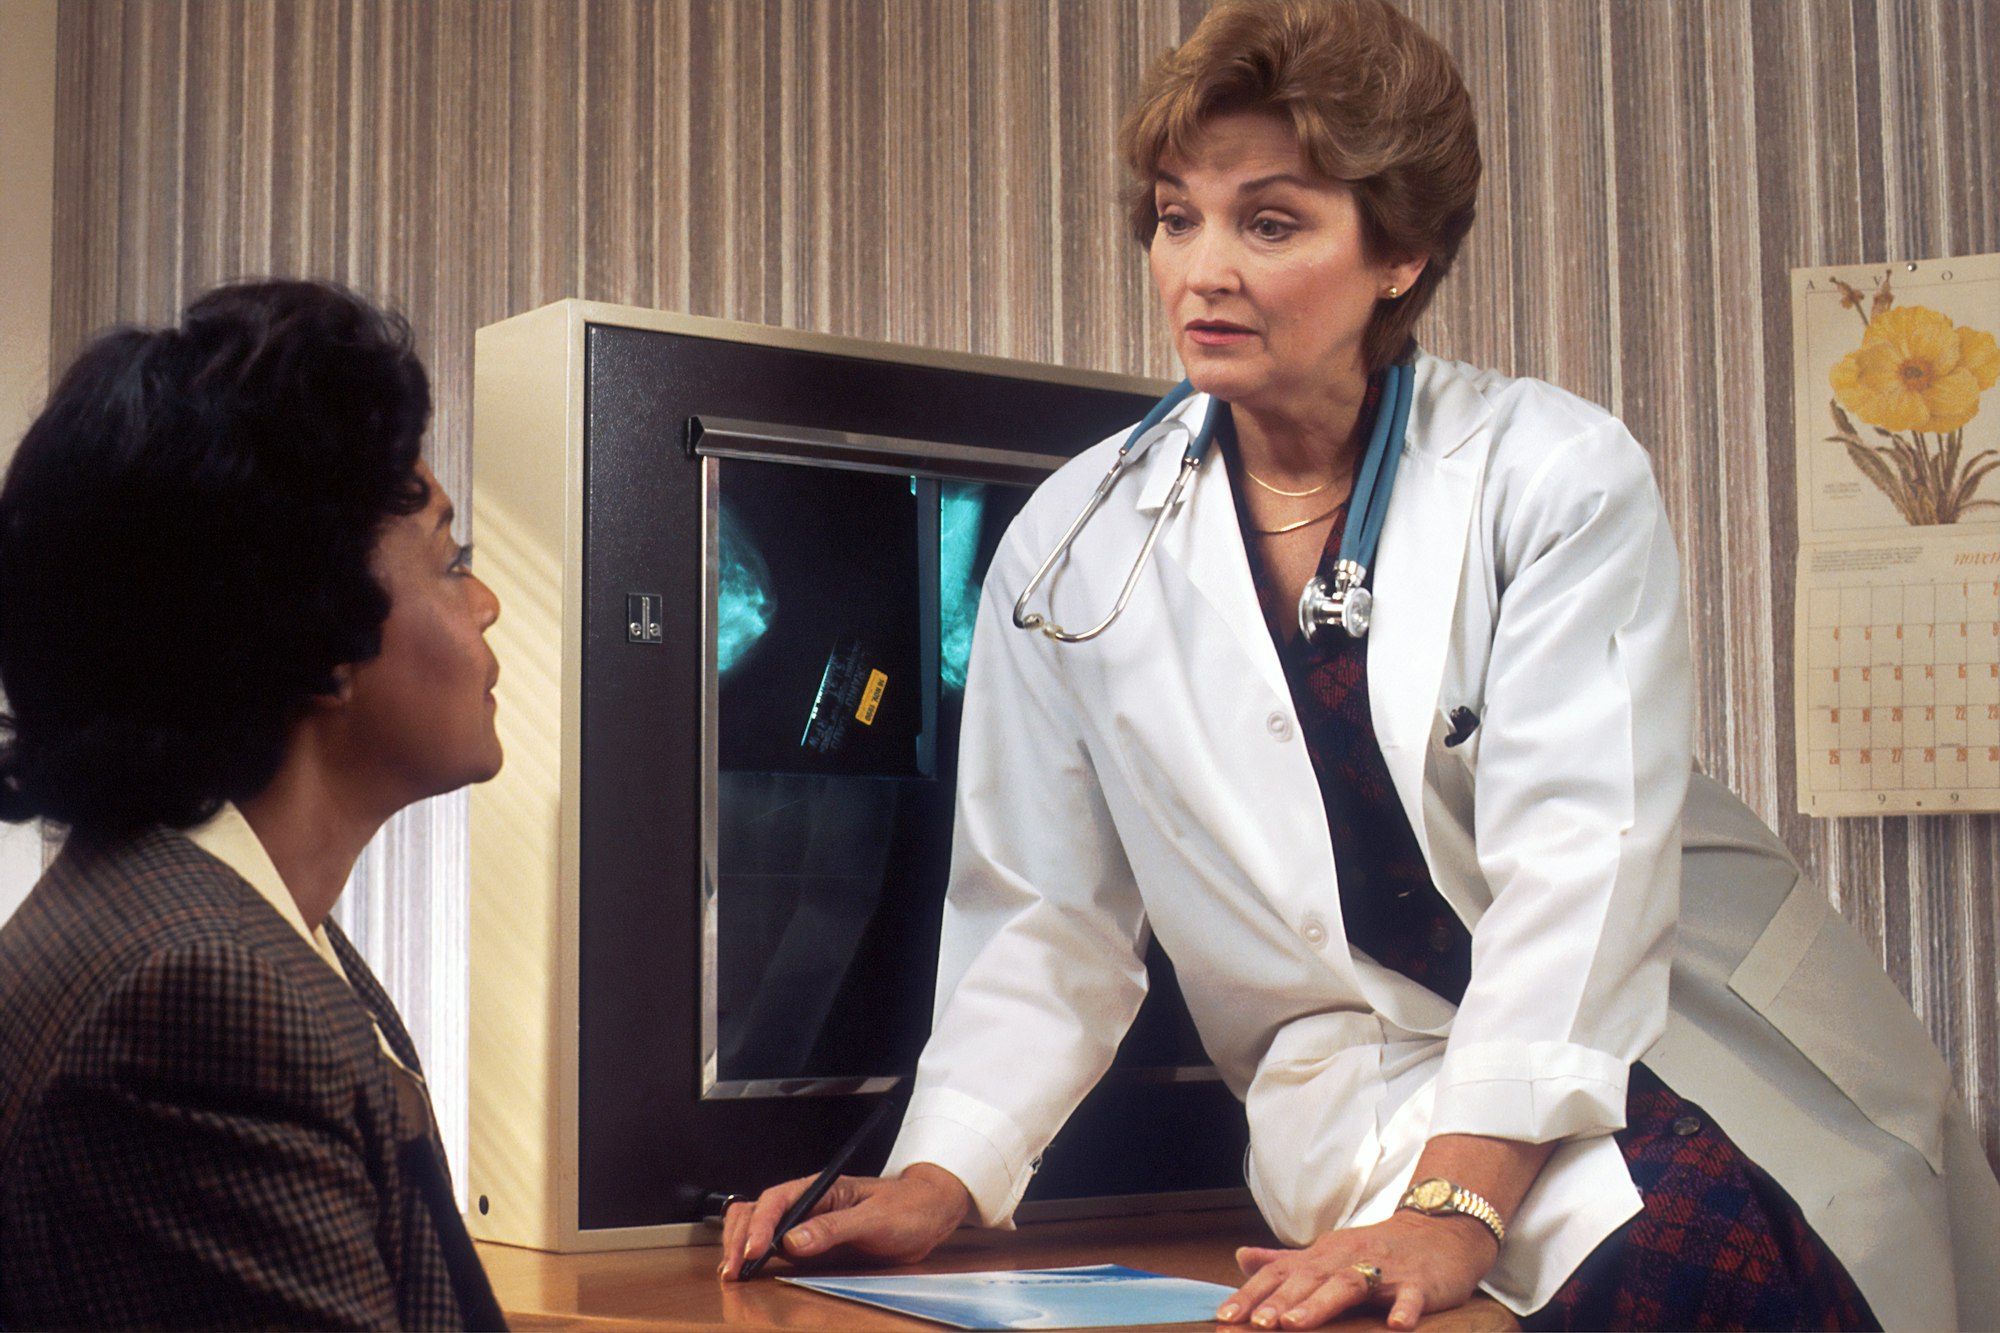 A Caucasian female doctor, sitting on her desk with mammograms on a view box behind her, speaks with an African-American female patient. 1990